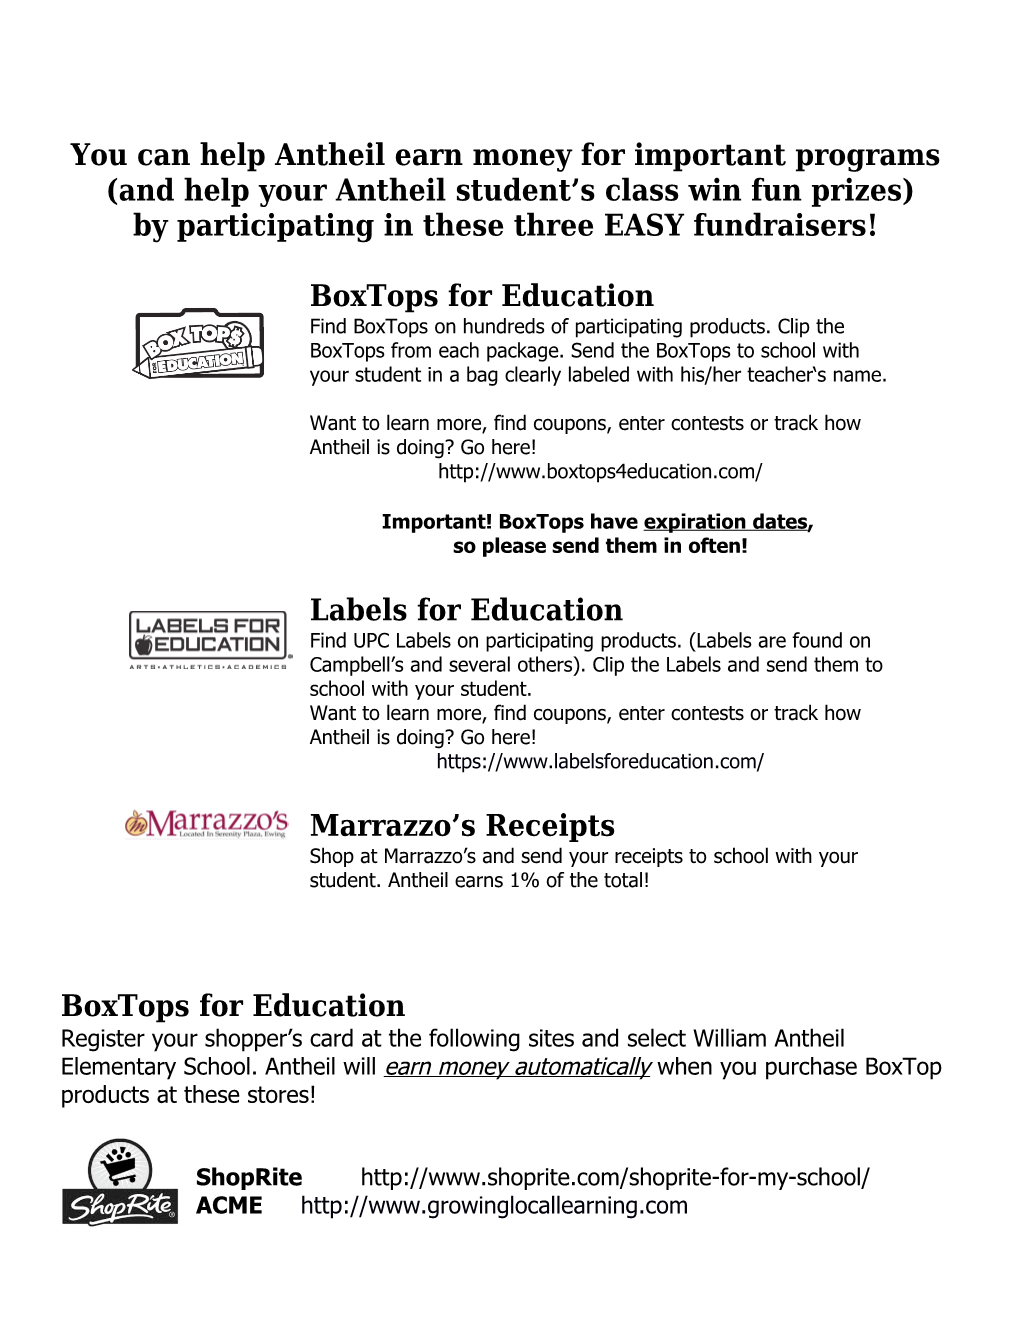 You Can Help Antheil Earn Money for Important Programs